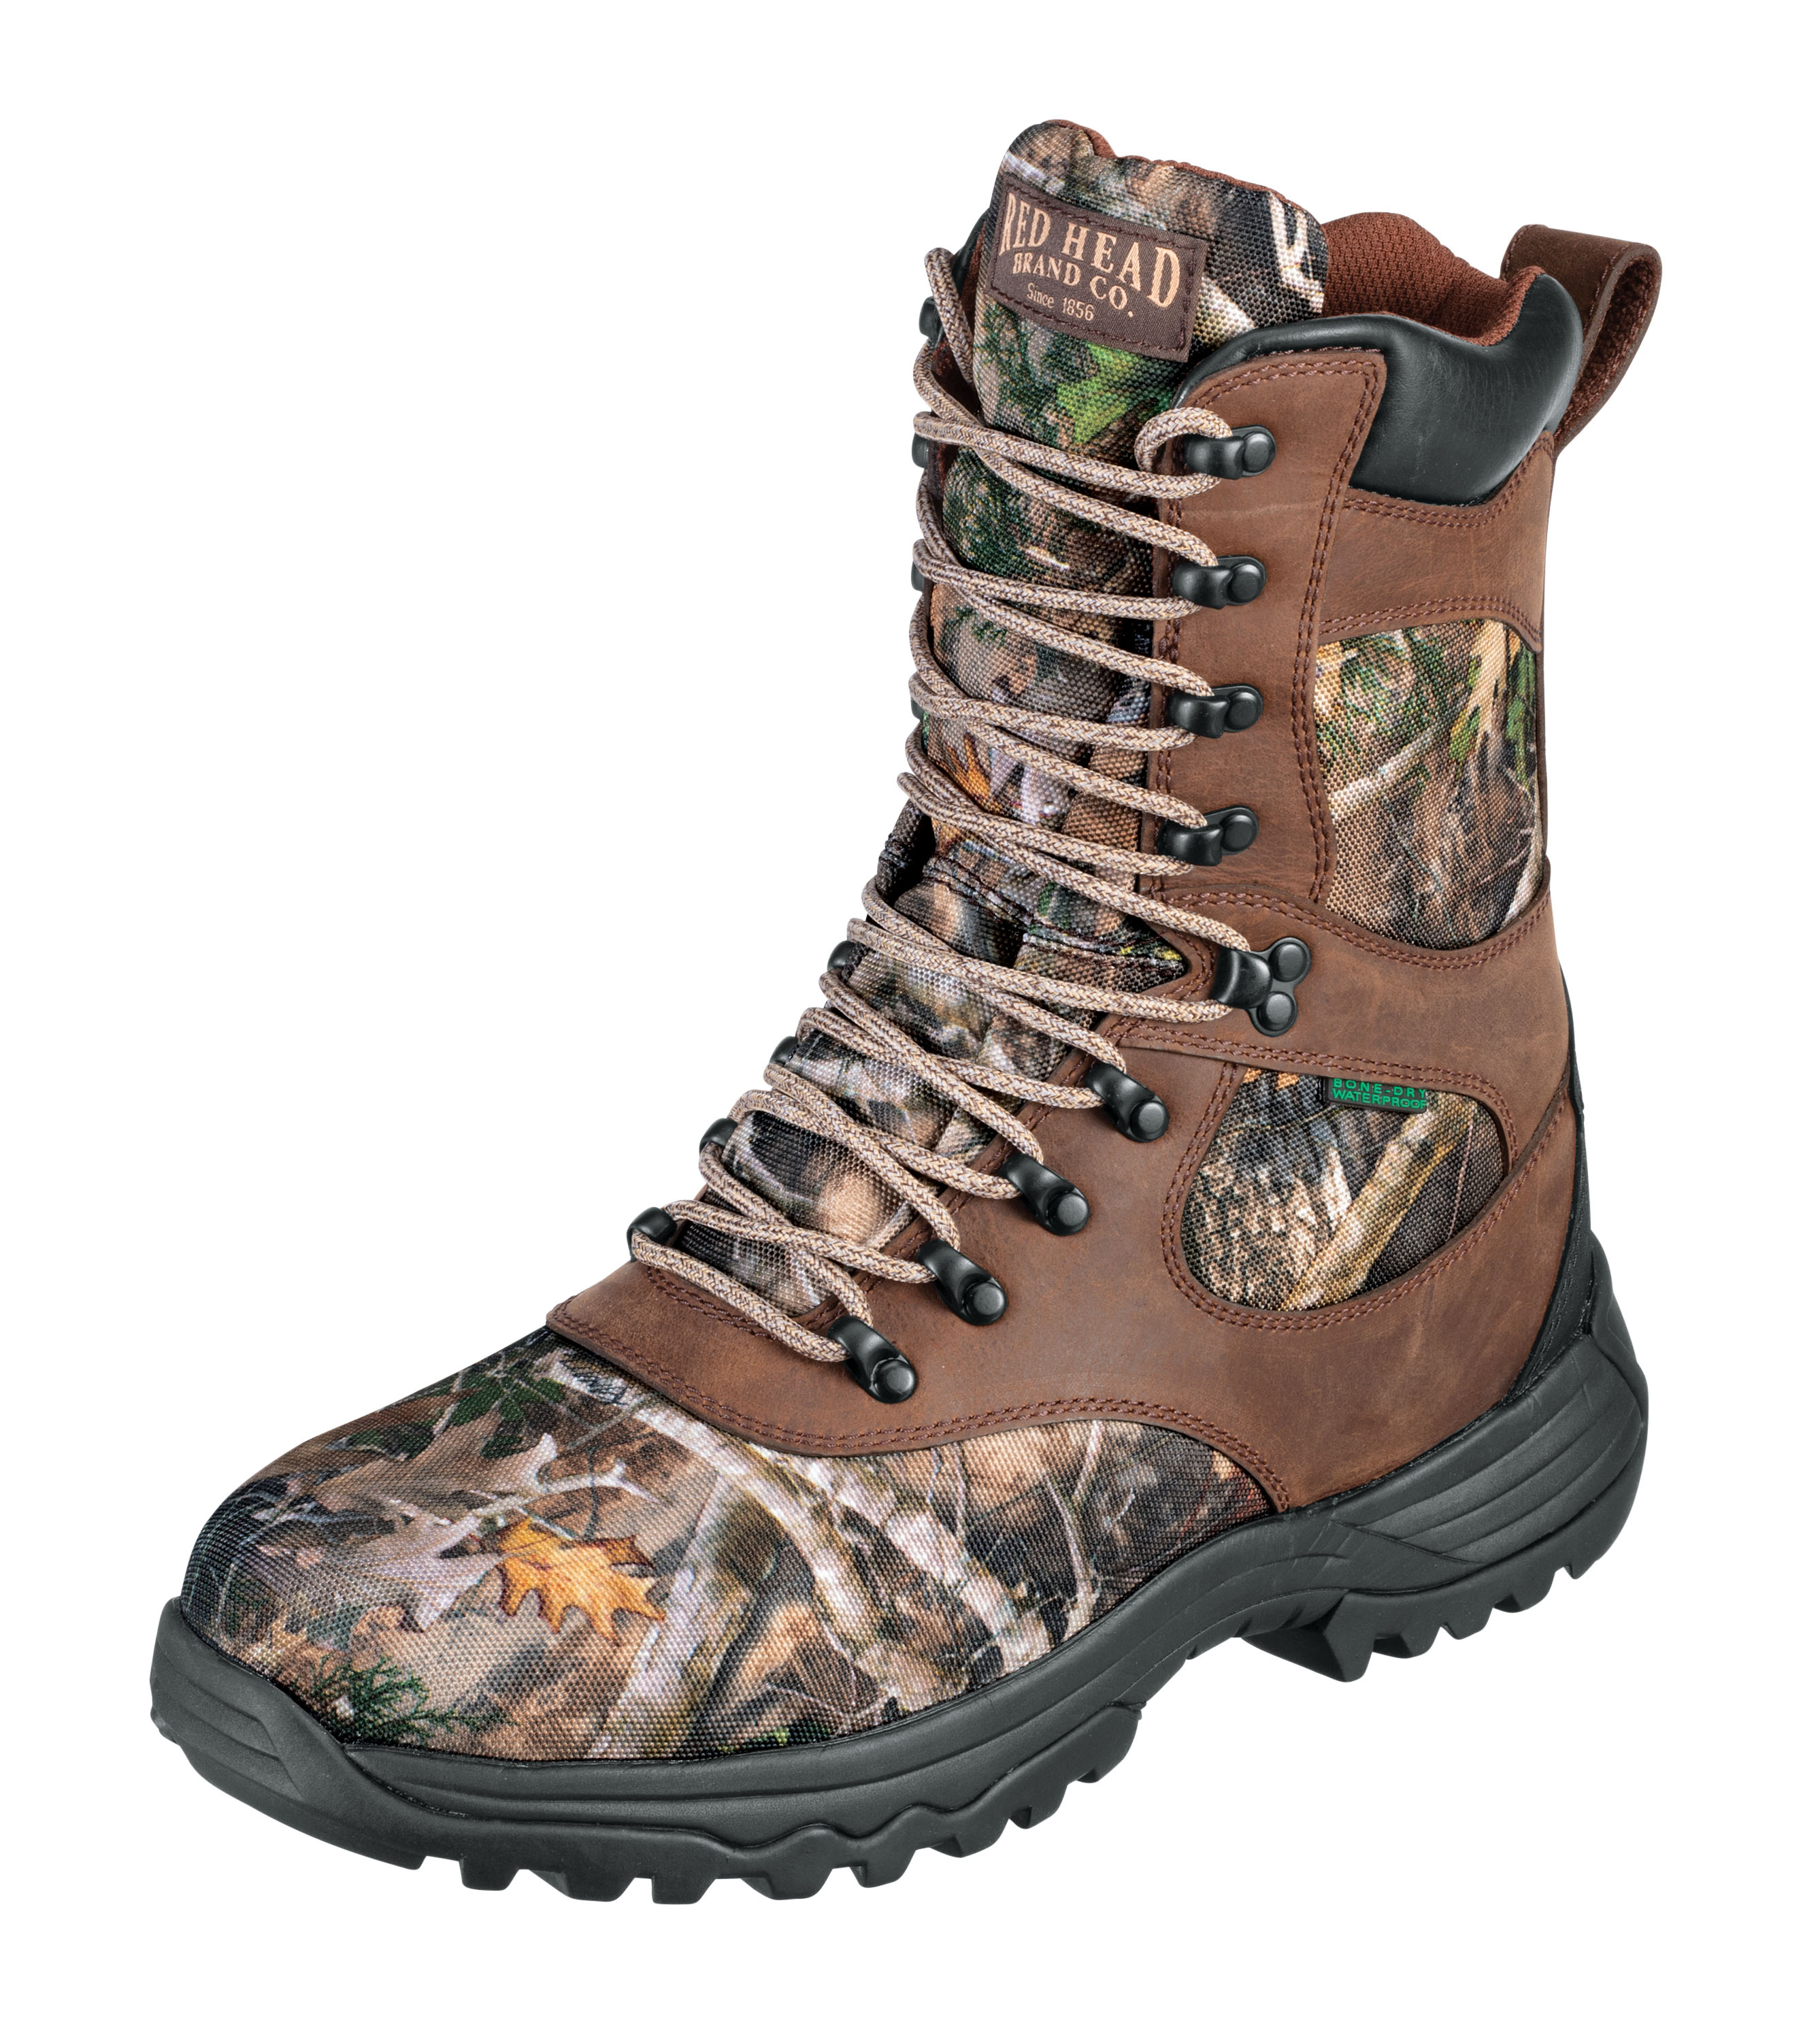 RedHead Expedition Ultra BONE-DRY Insulated Waterproof Hunting Boots for Men